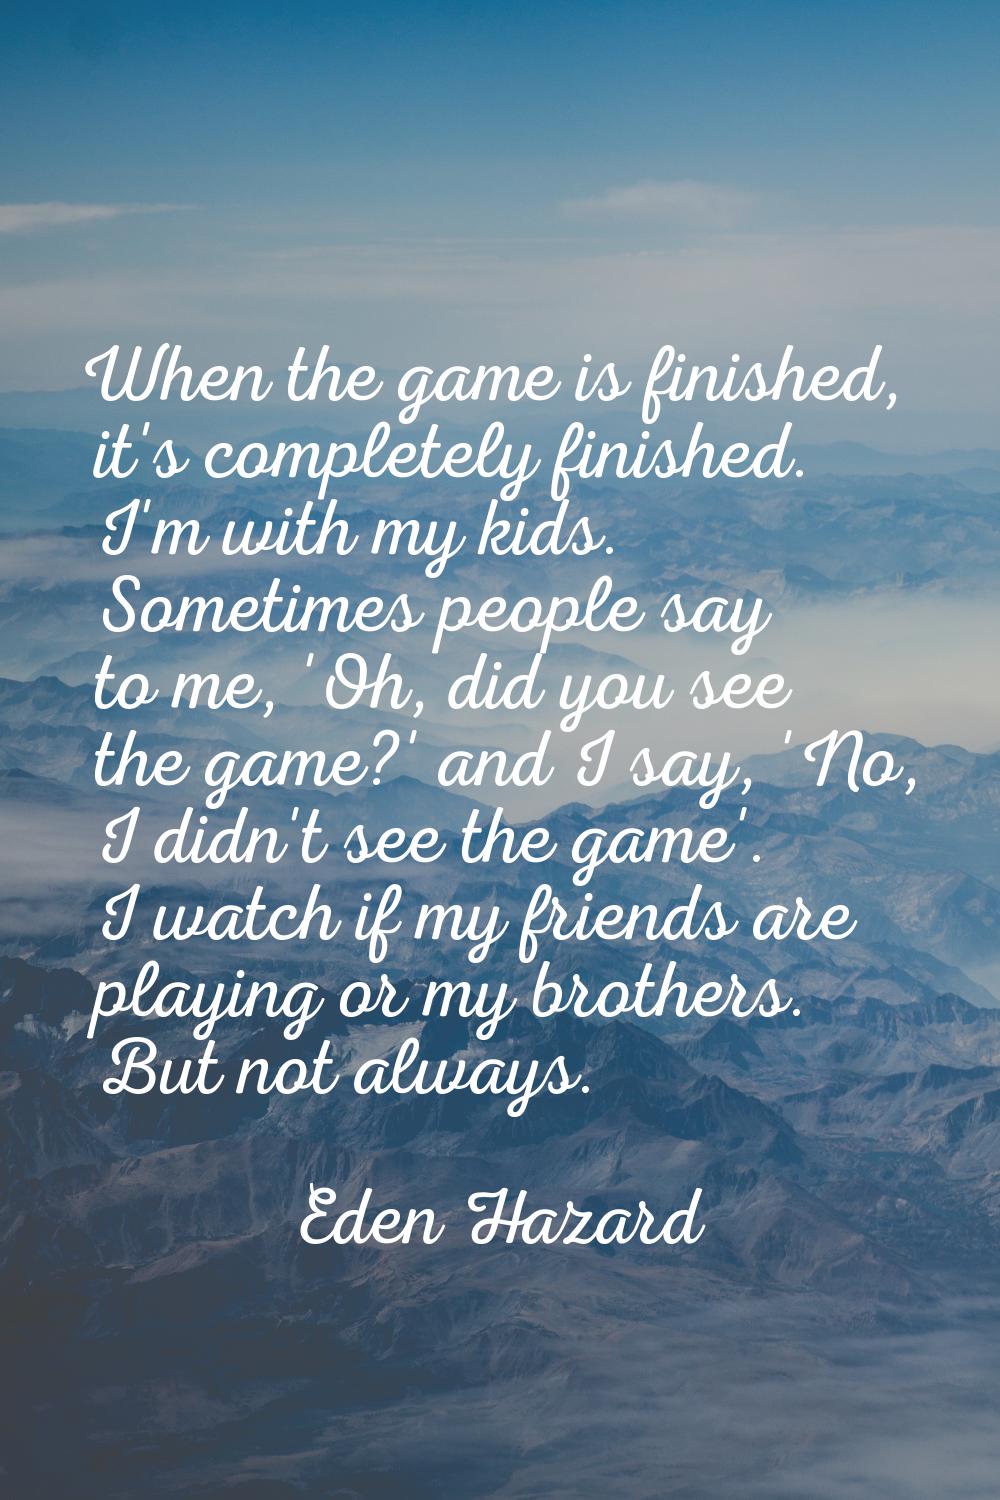 When the game is finished, it's completely finished. I'm with my kids. Sometimes people say to me, 